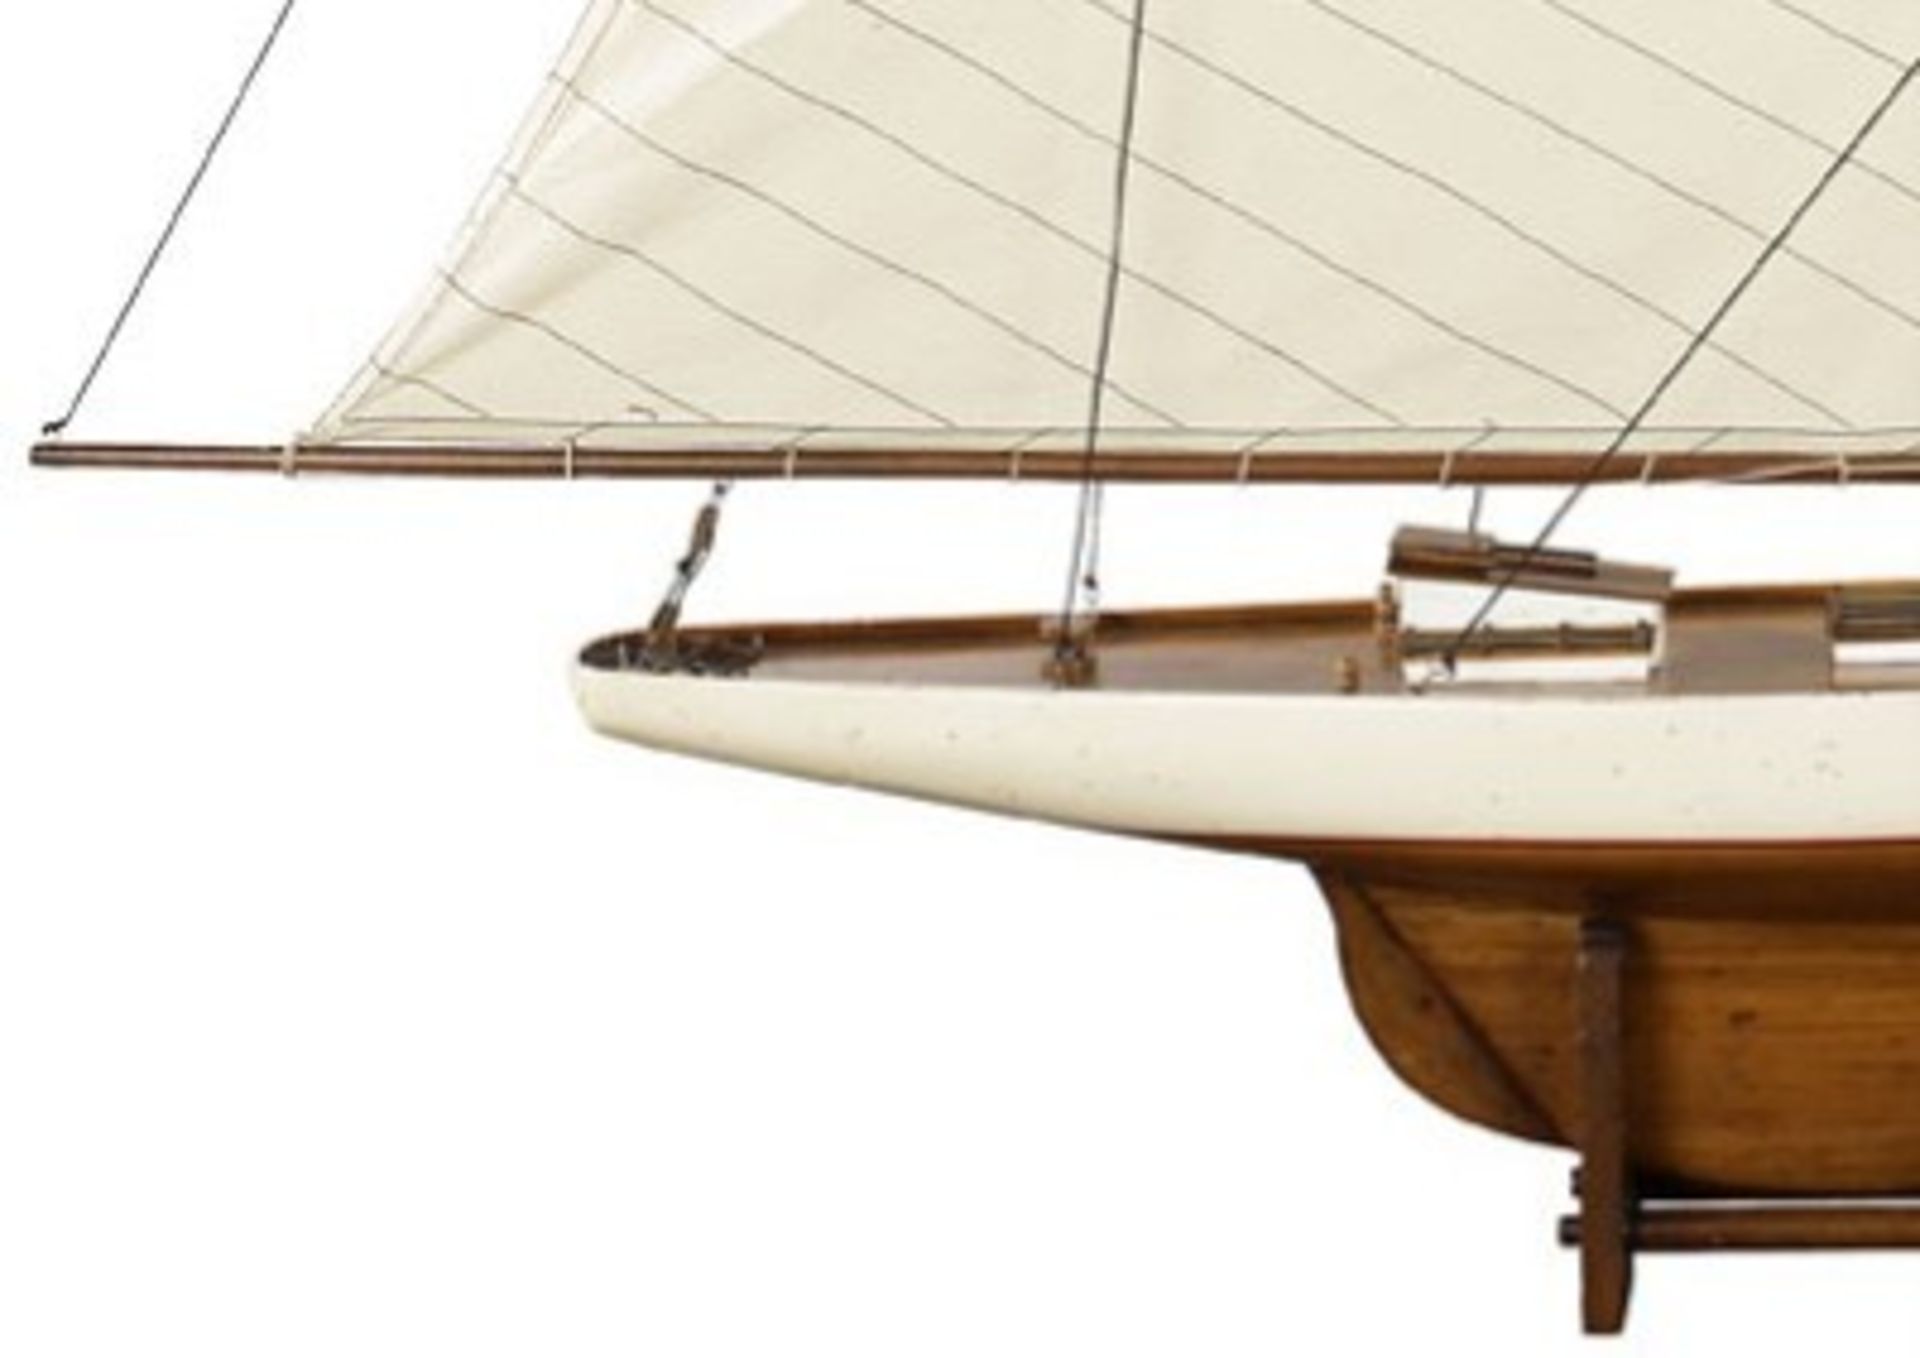 America's Cup Columbia 1901 Racing Yacht Detailed Scale Model - Image 3 of 7